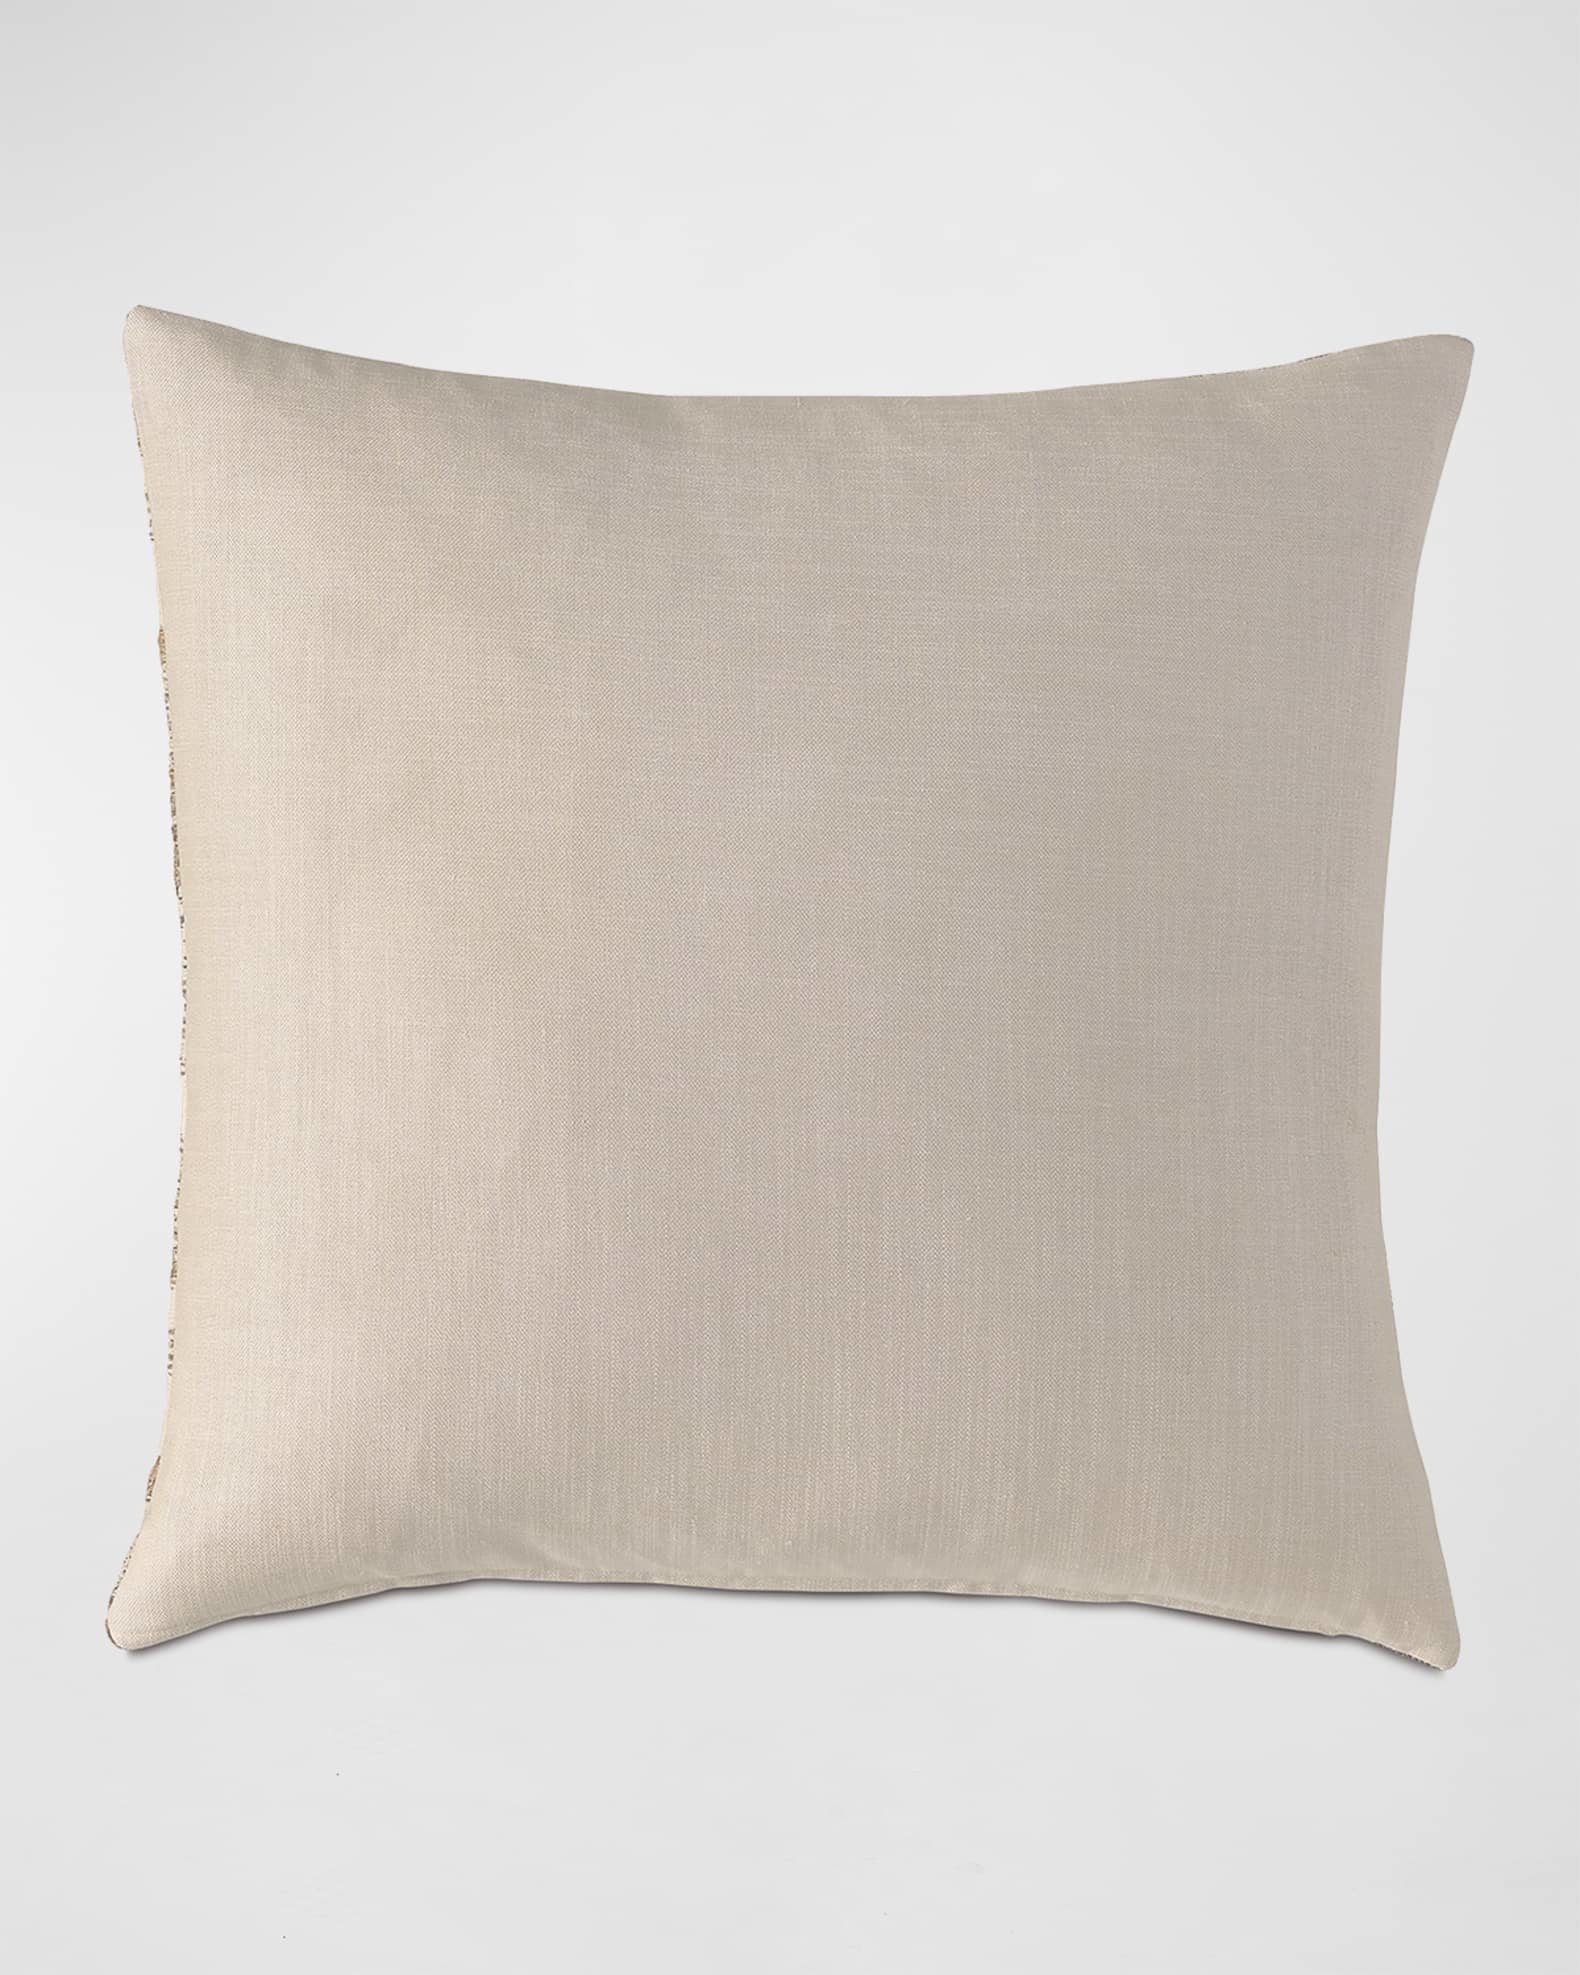 Eastern Accents EA Teryn Textured Pillow 22x22